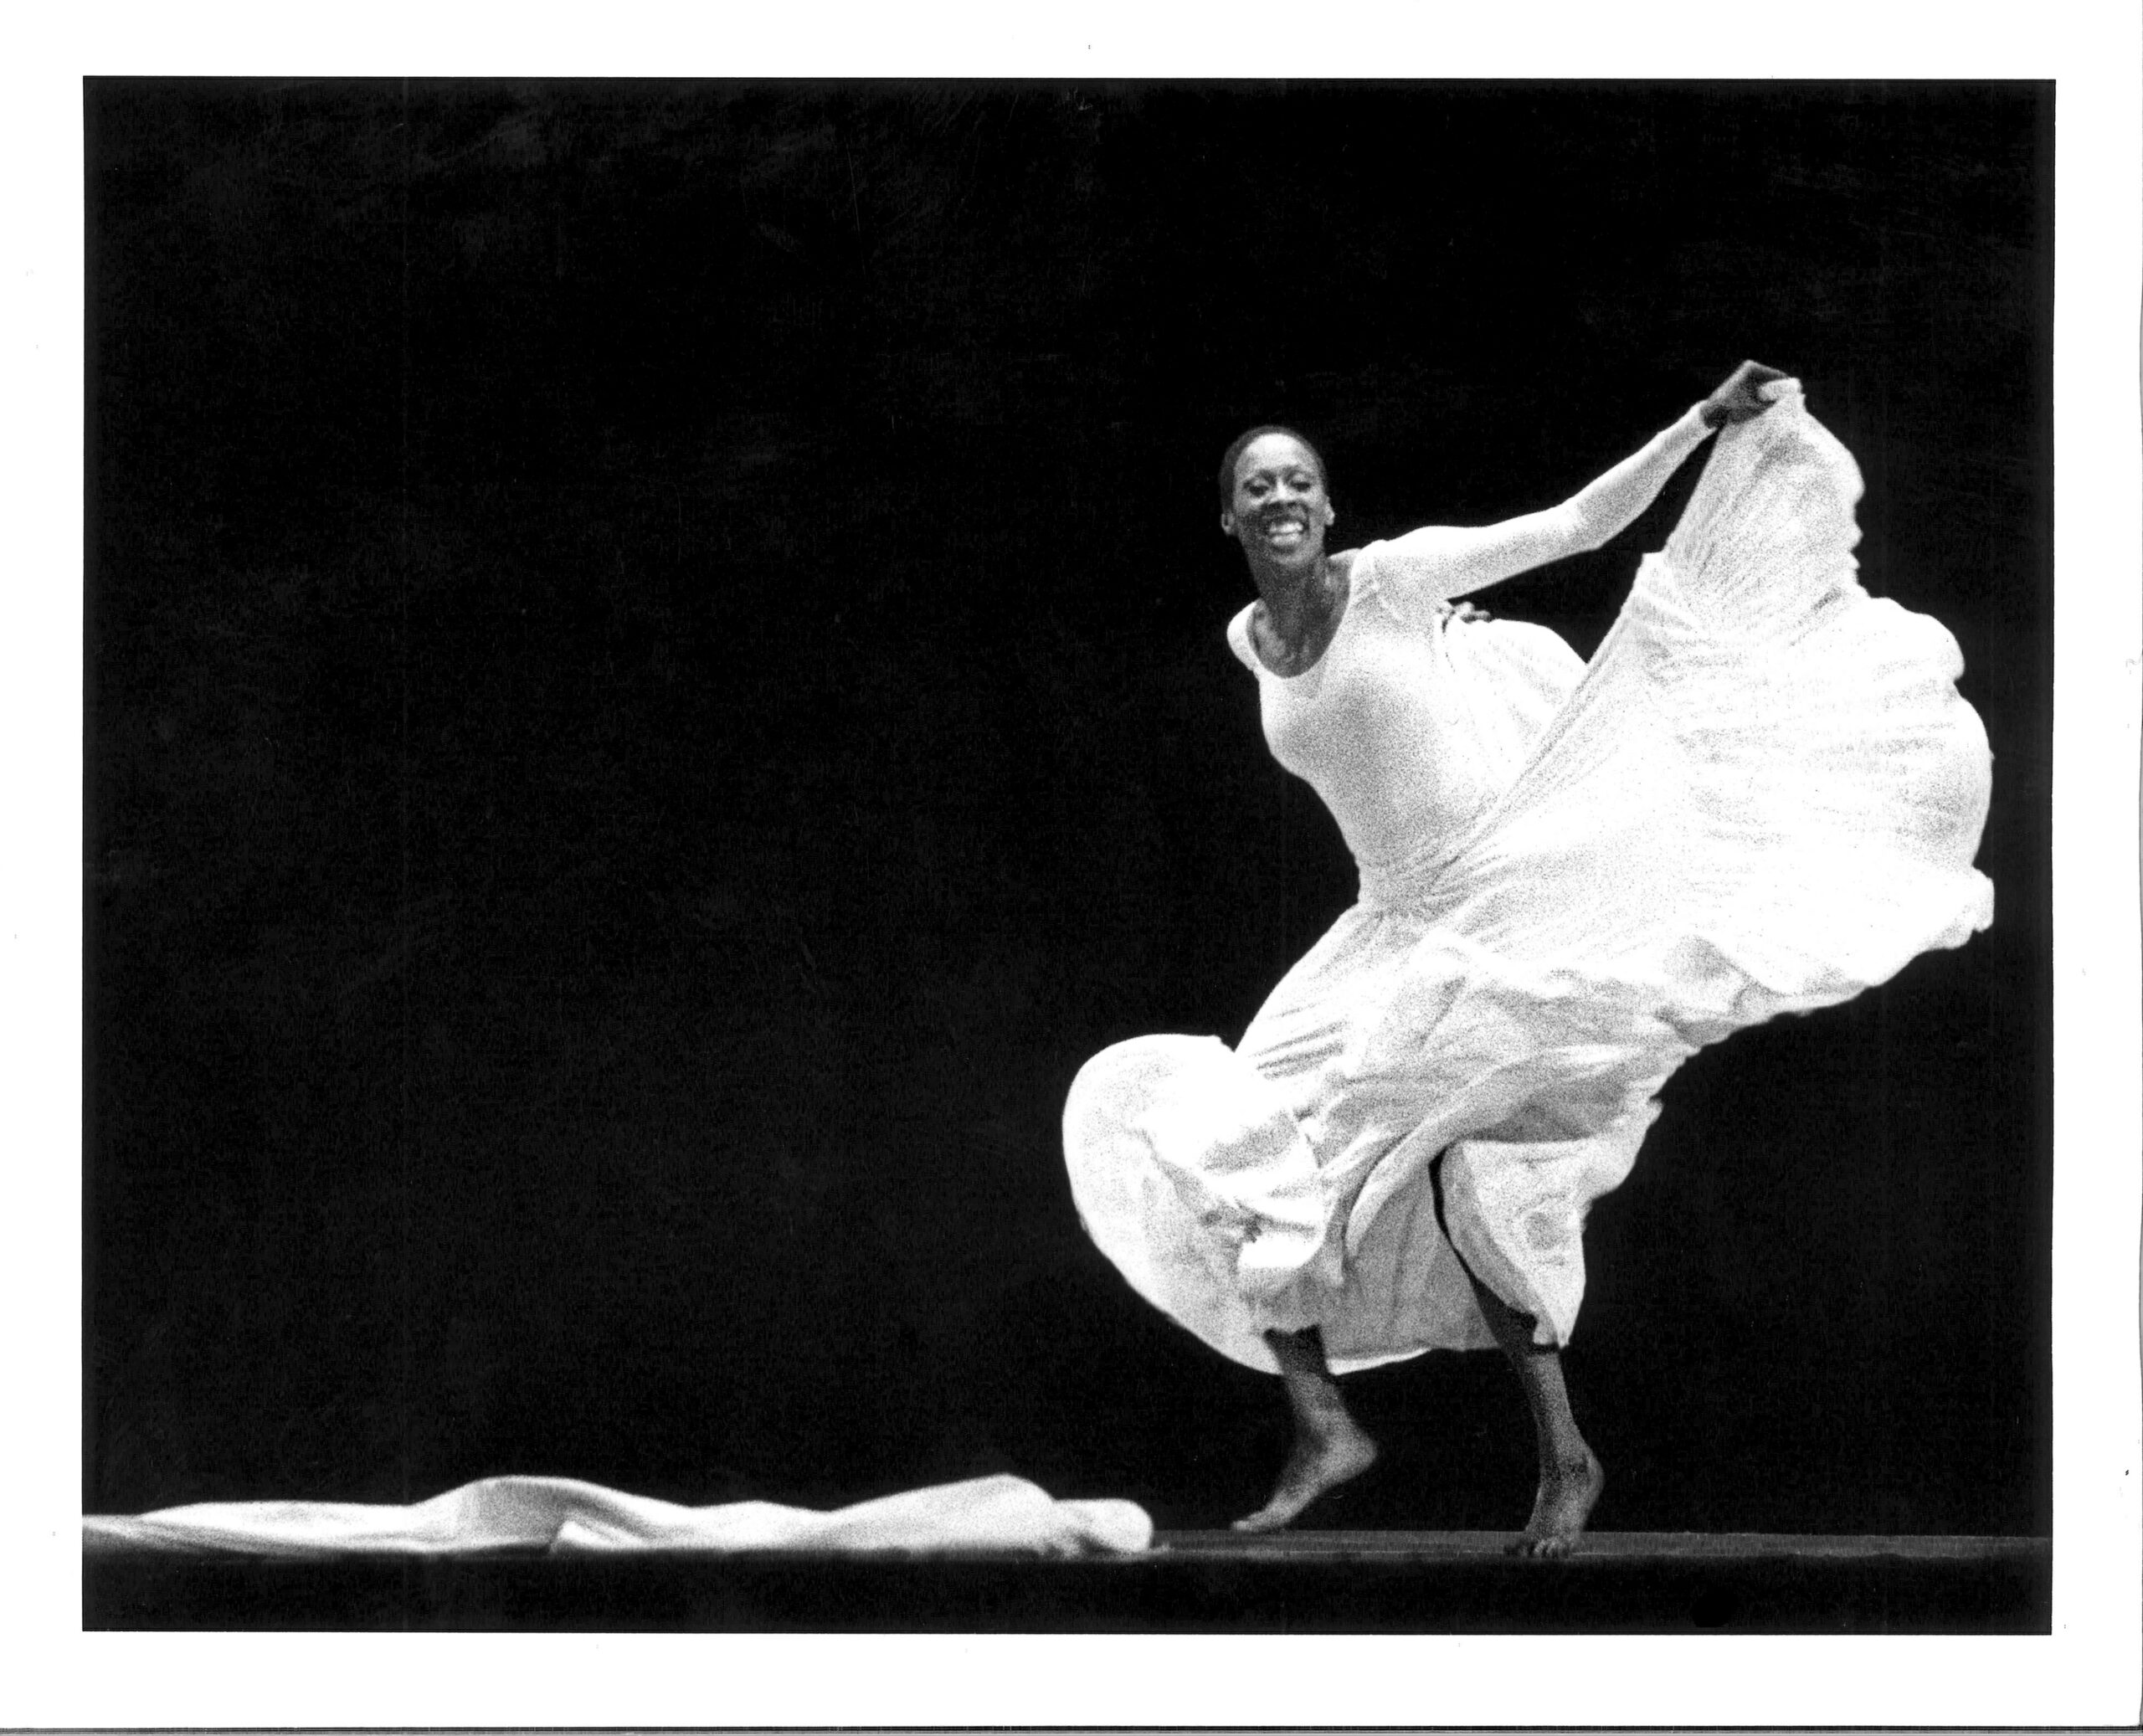 In a black and white archival image, Judith Jamison grins infectiously as she dances. She wears a long white dress, the skirt of which she lifts into a ripple with one arm as she moves lithely on the balls of her feet, knees bent.